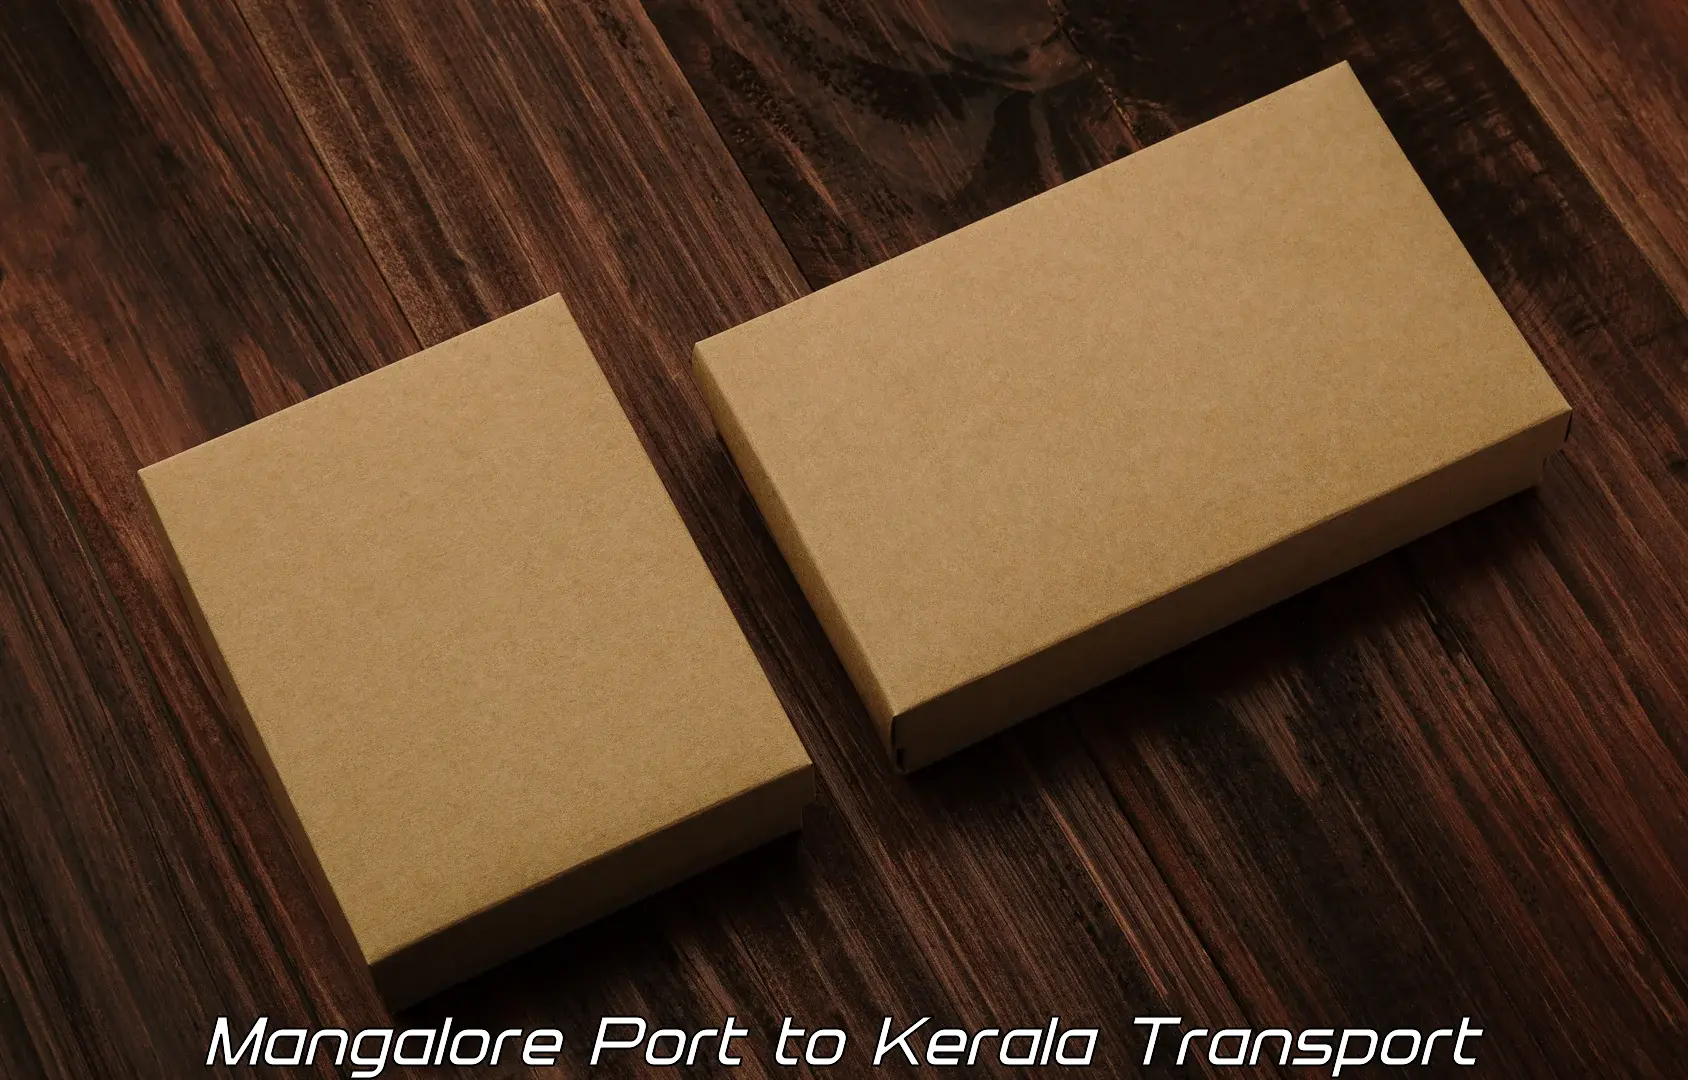 Air freight transport services Mangalore Port to Kerala